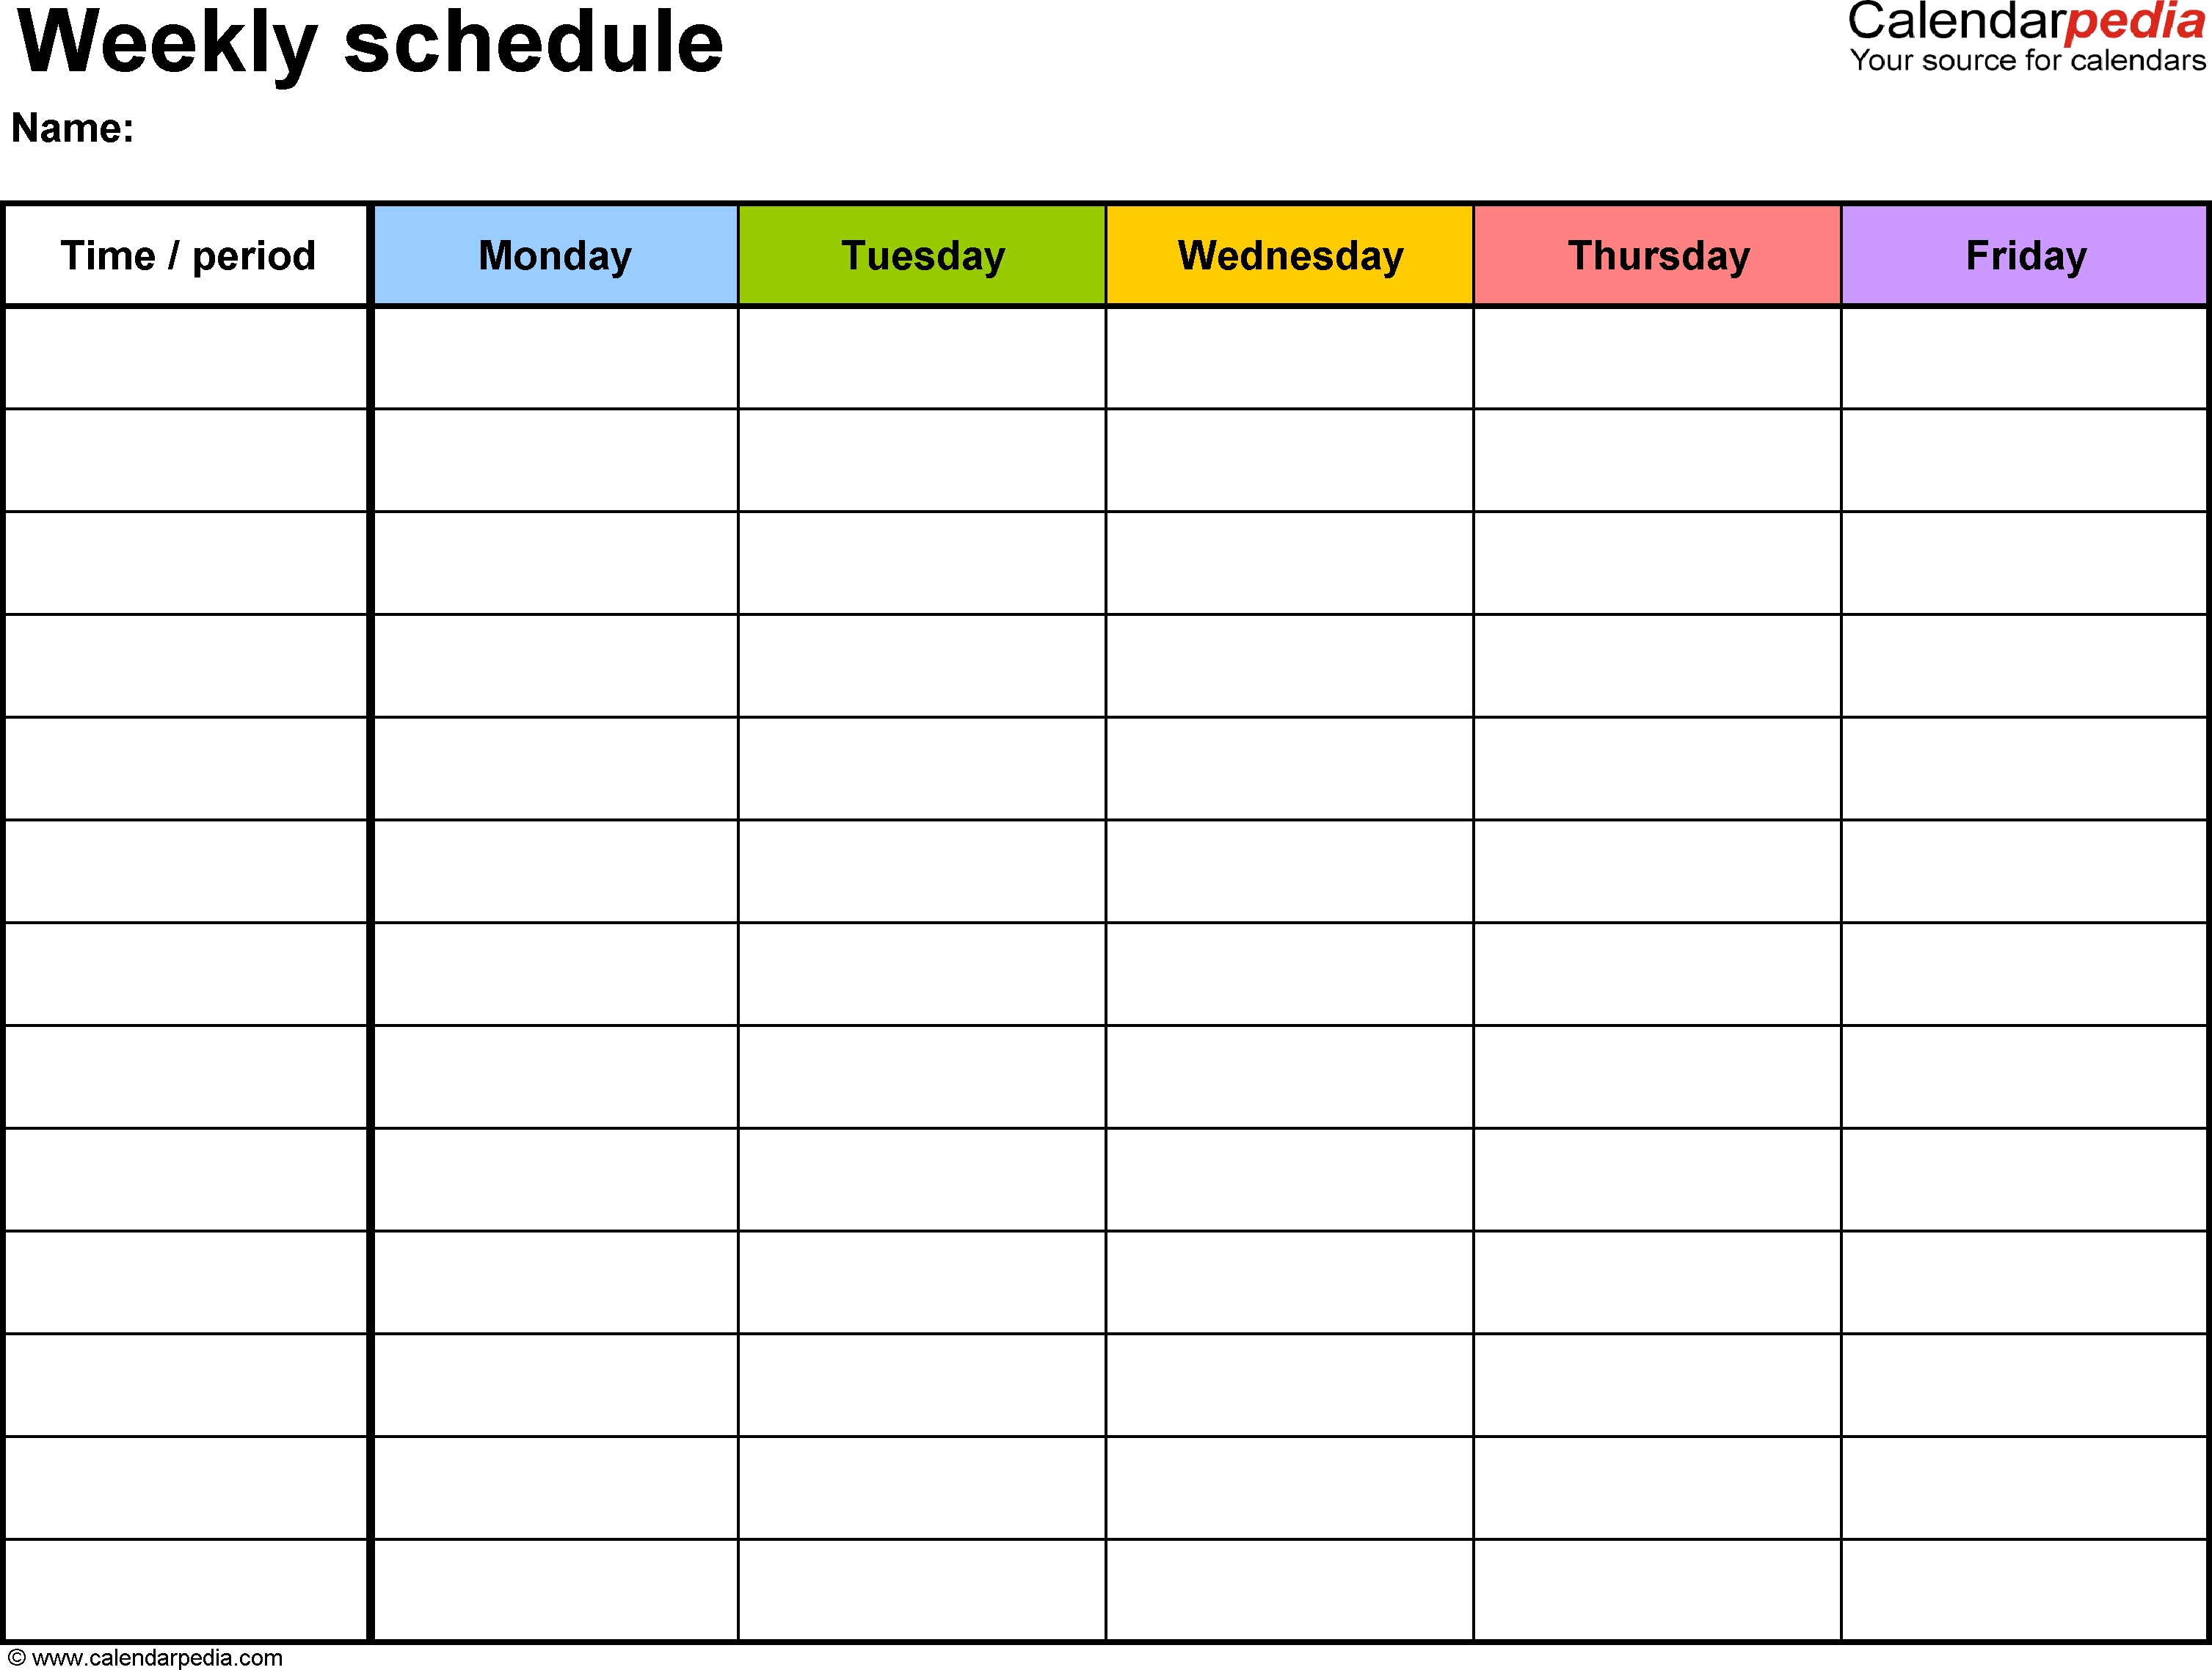 Free Weekly Schedule Templates For Word - 18 Templates  Free Printable Weekly Calendar Templates